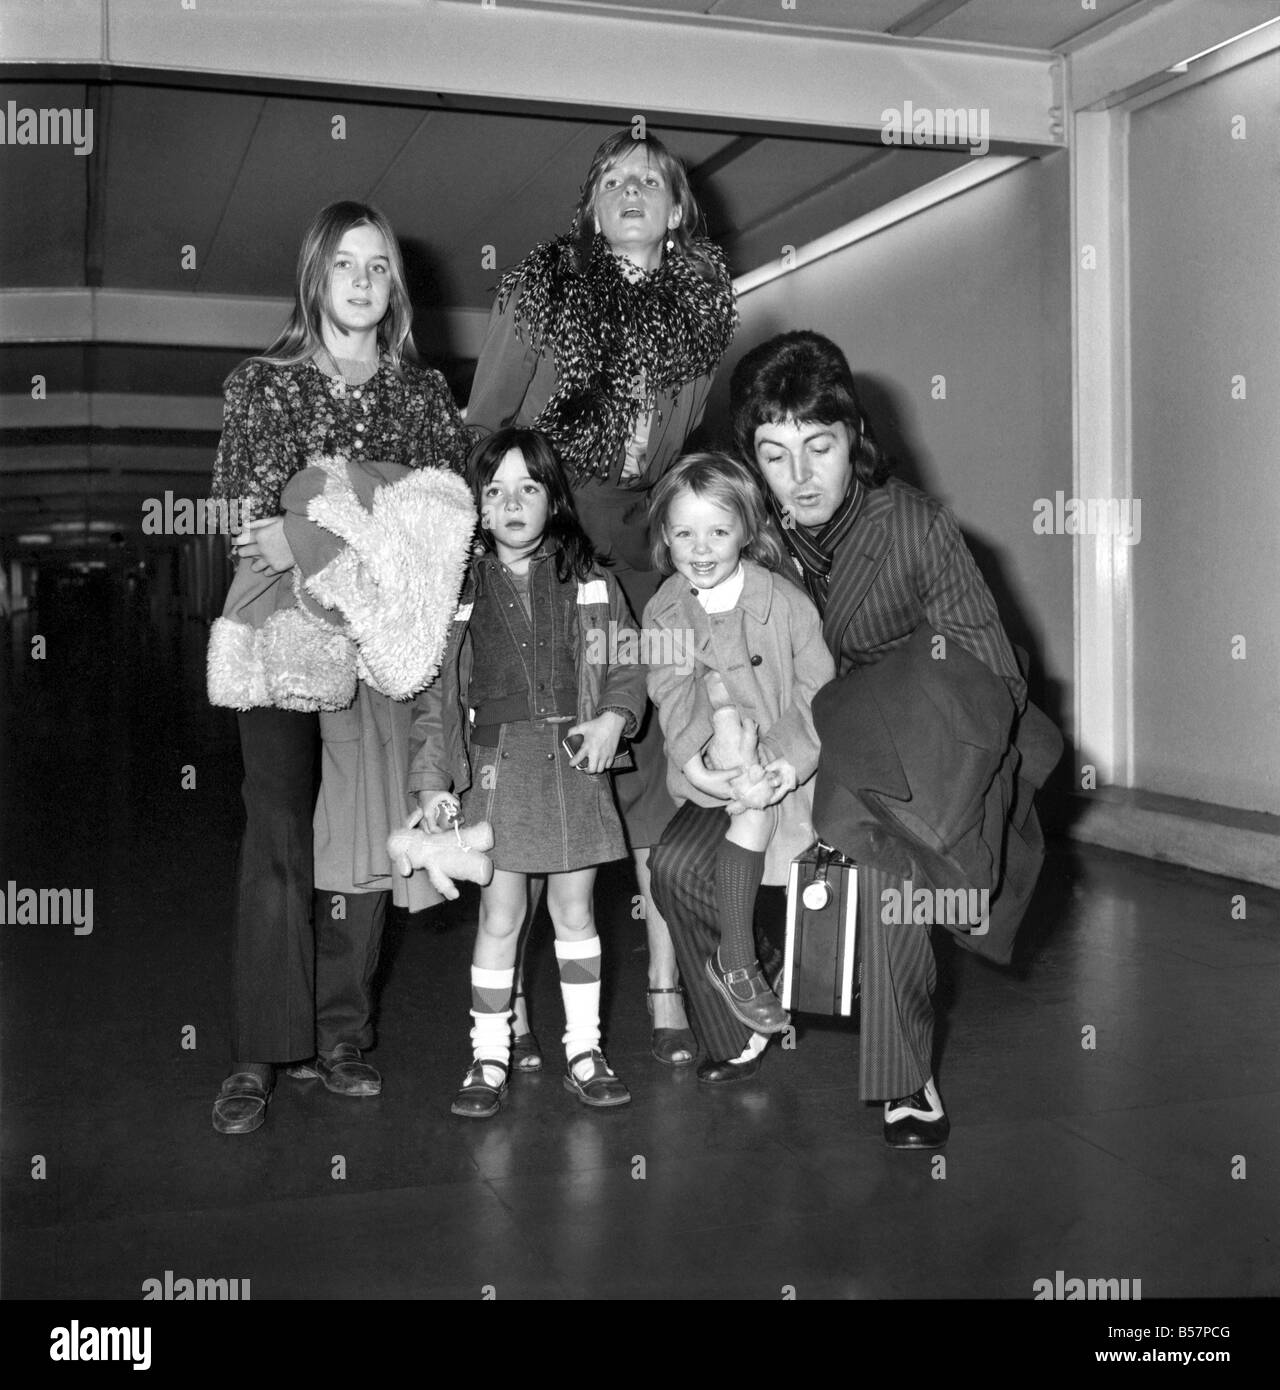 Paul McCartney serenaded by daughters in rare family footage for joyous  occasion